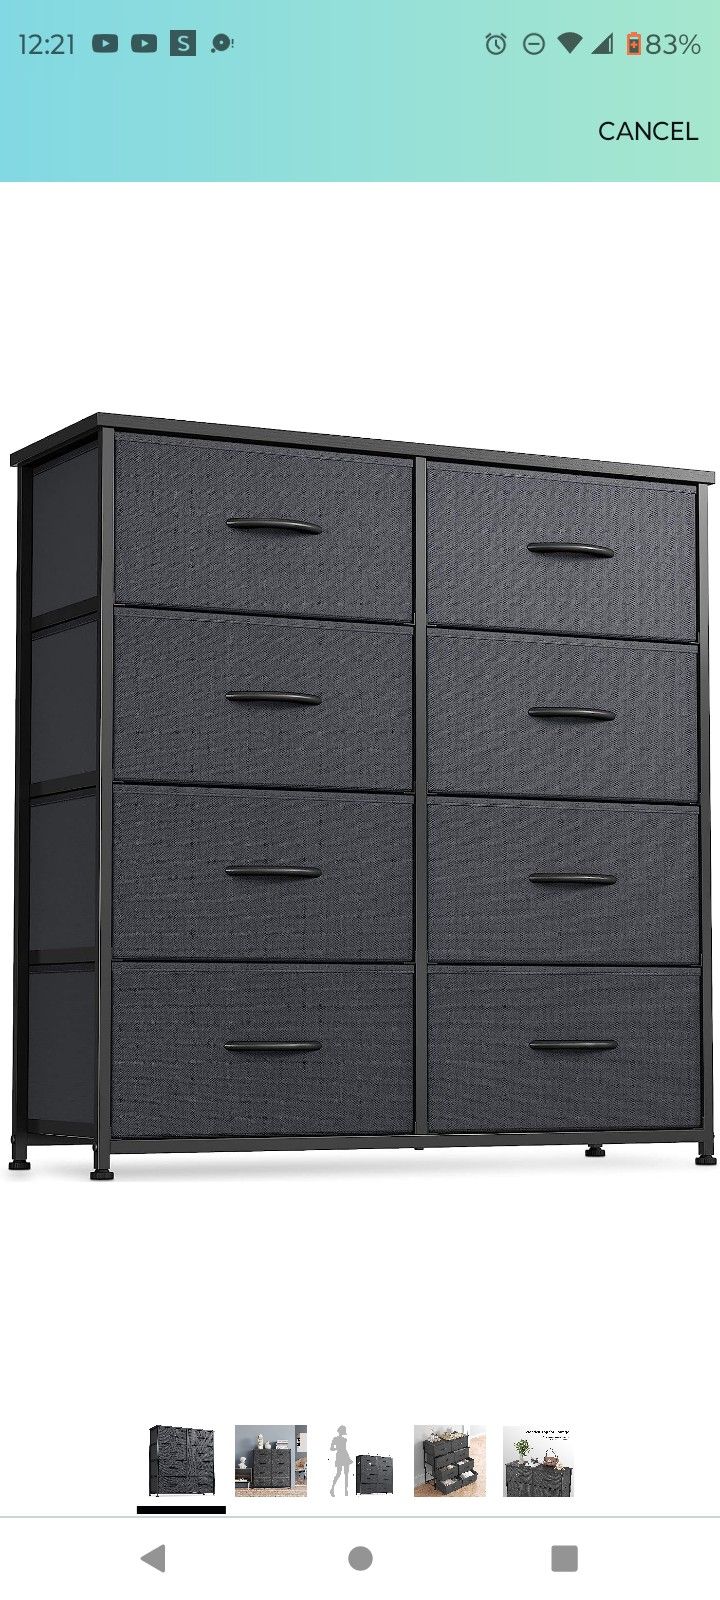 CubiCubi 8 Drawer Dresser/Organizer Black large and wide near Fort Greene Park and Commodore Barry Park